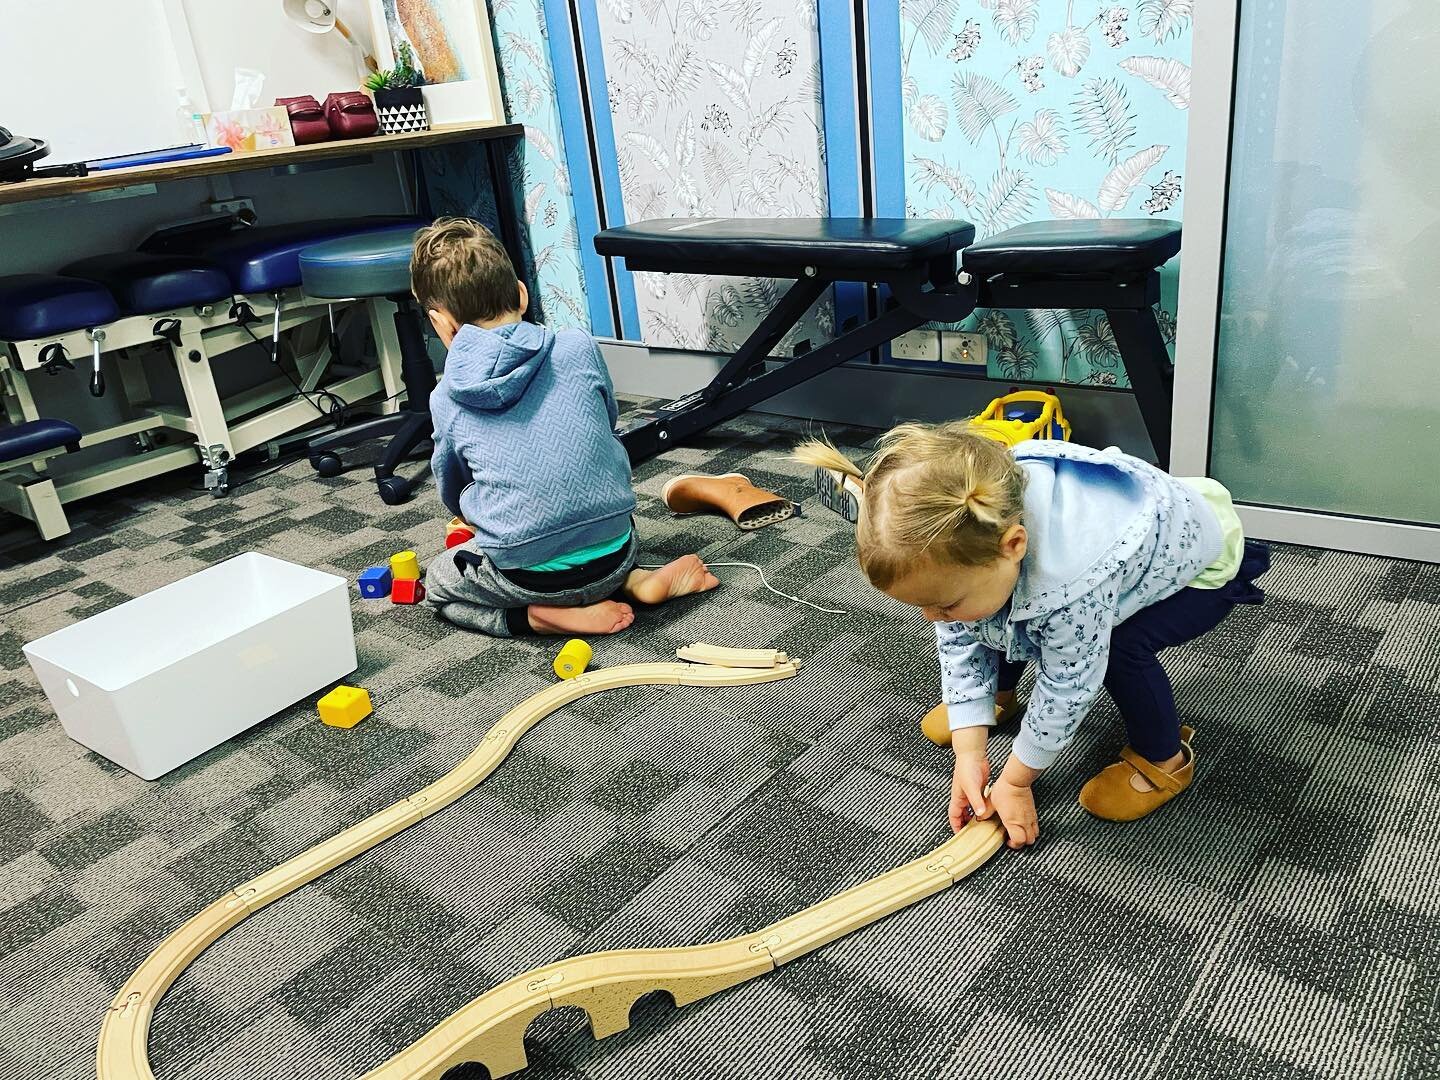 👧🏻🧒🏼 Bringing your kids to your appointment? No worries!👍🏼
.
We have kids toys to keep the little ones occupied while you look after your health 🙌🏼
.
Book online now at: www.northbeachchiro.com.au or 📞 call us on (08) 9448 2282.